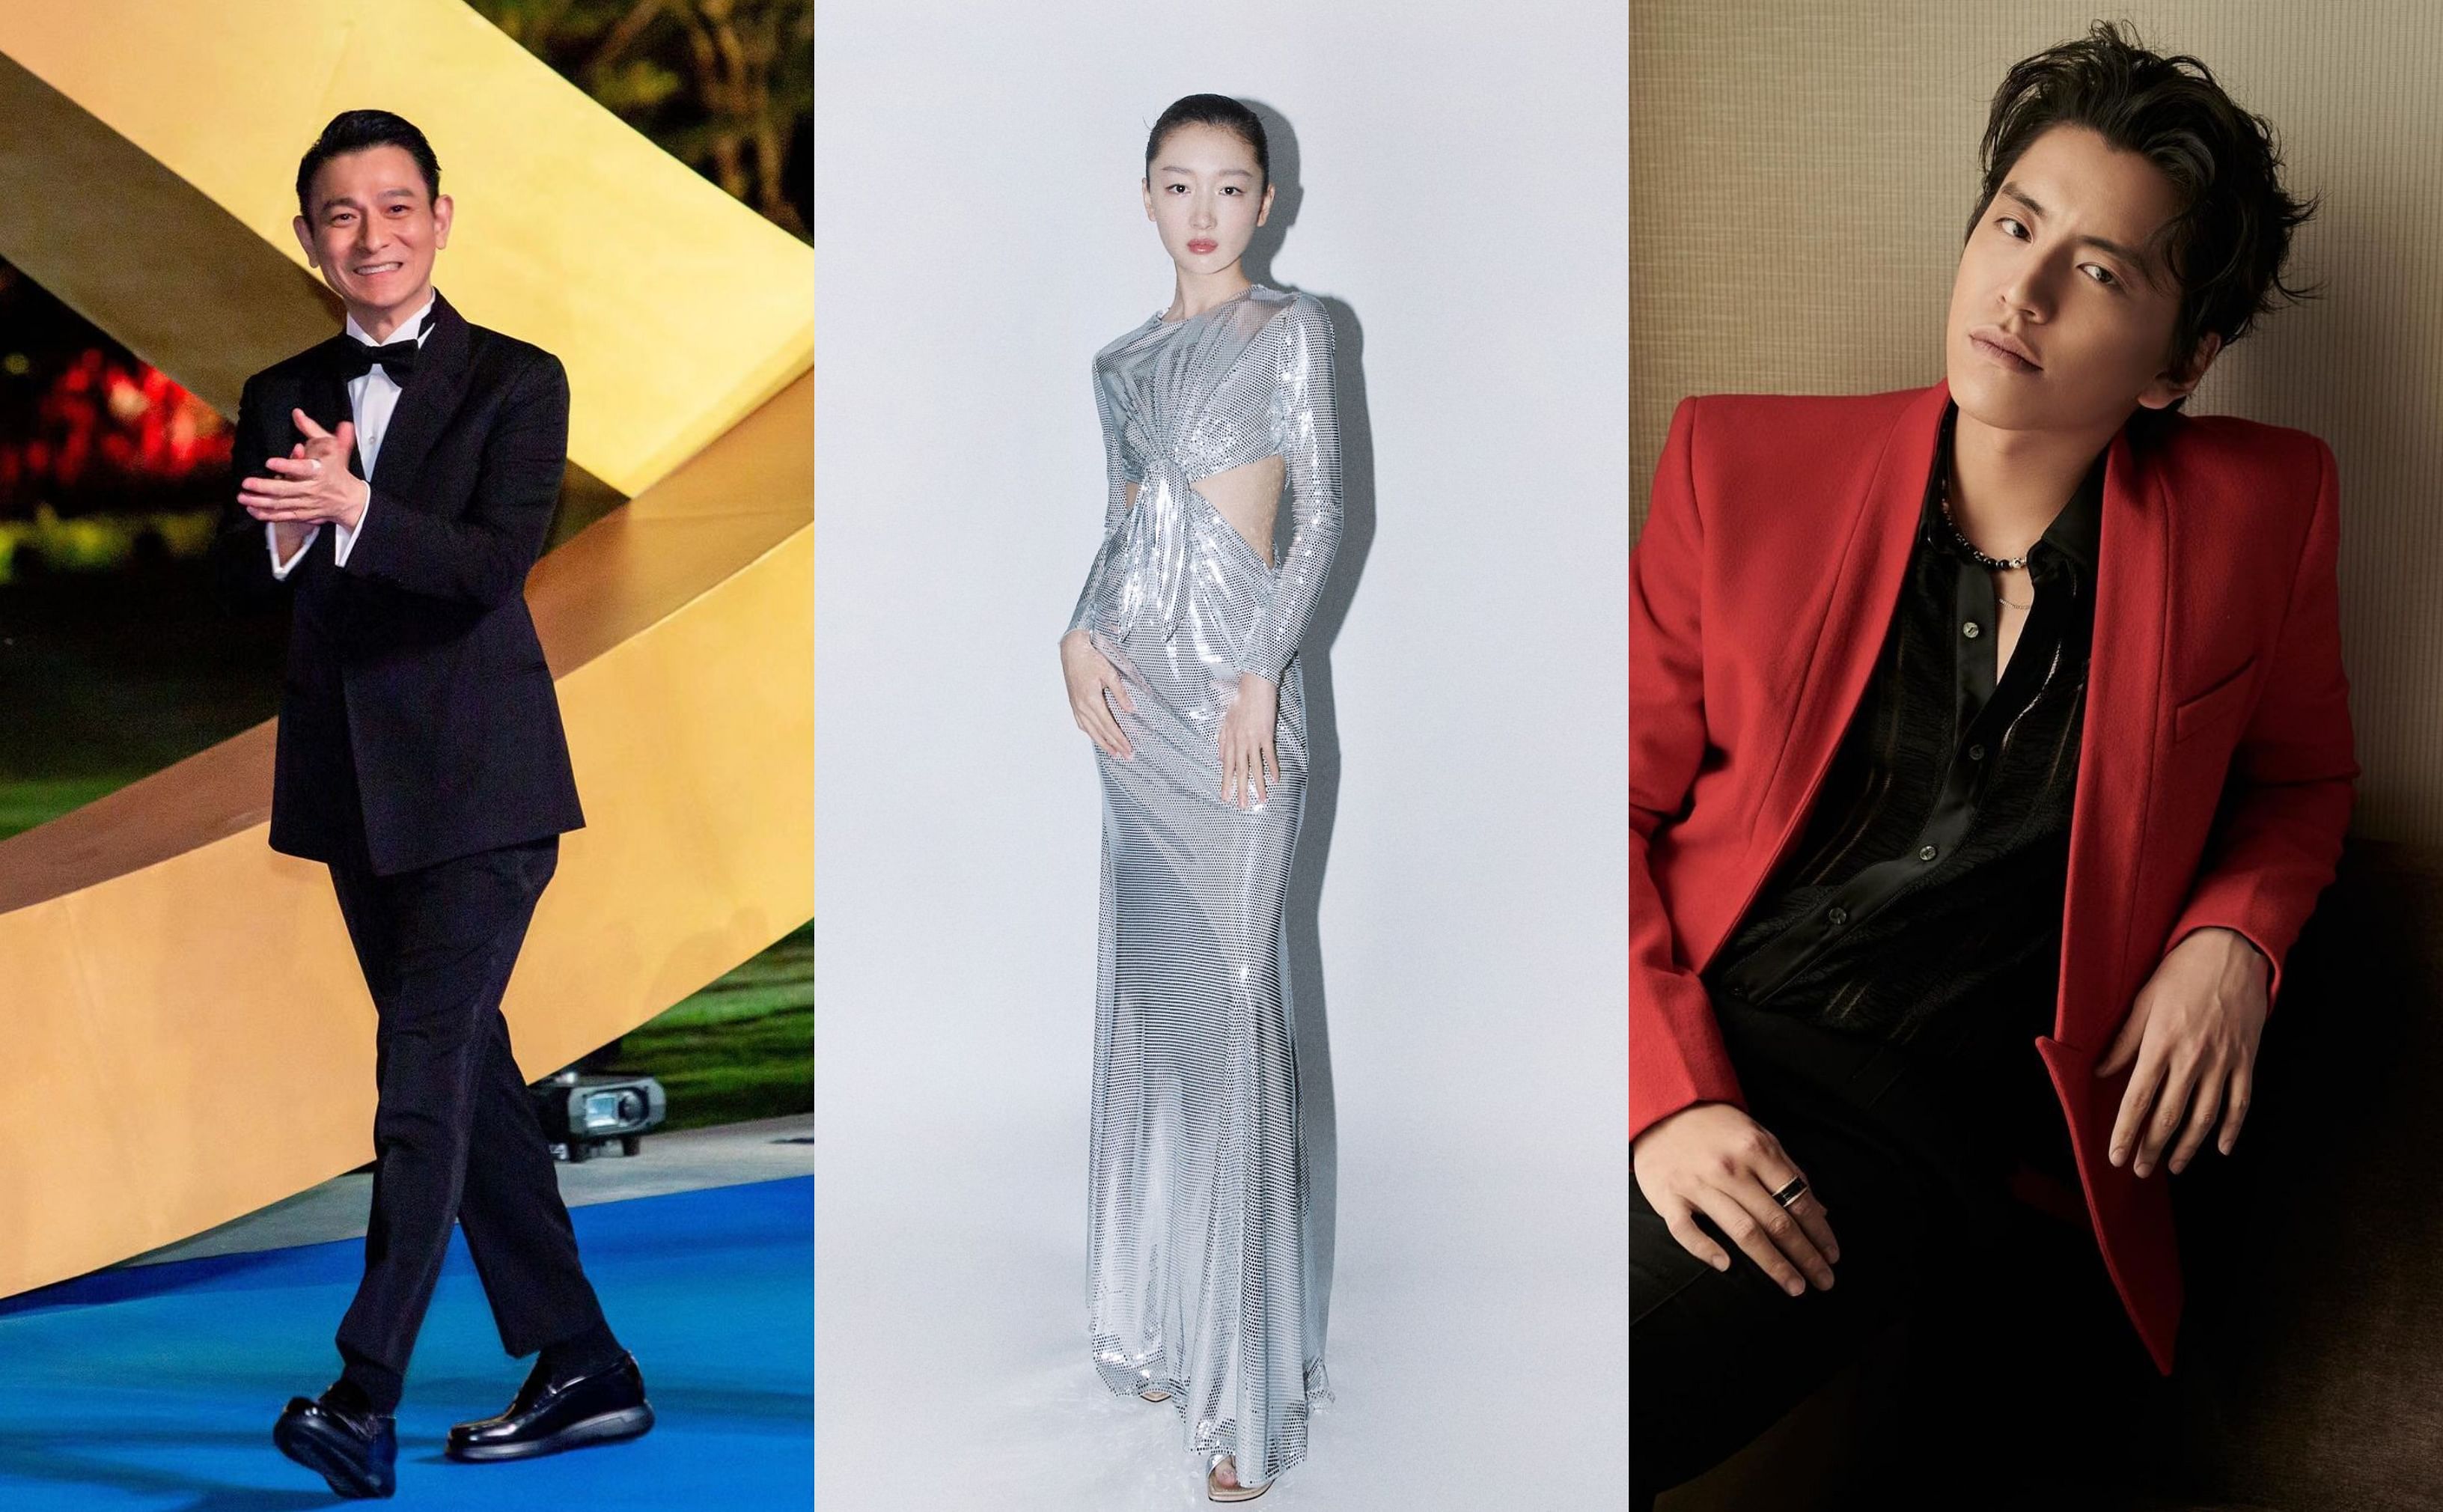 Golden Rooster Awards, Zhou Dong Yu, Andy Lau, Best Dressed, Fashion, Celebrities, Red Carpet, Huang Xiao Ming